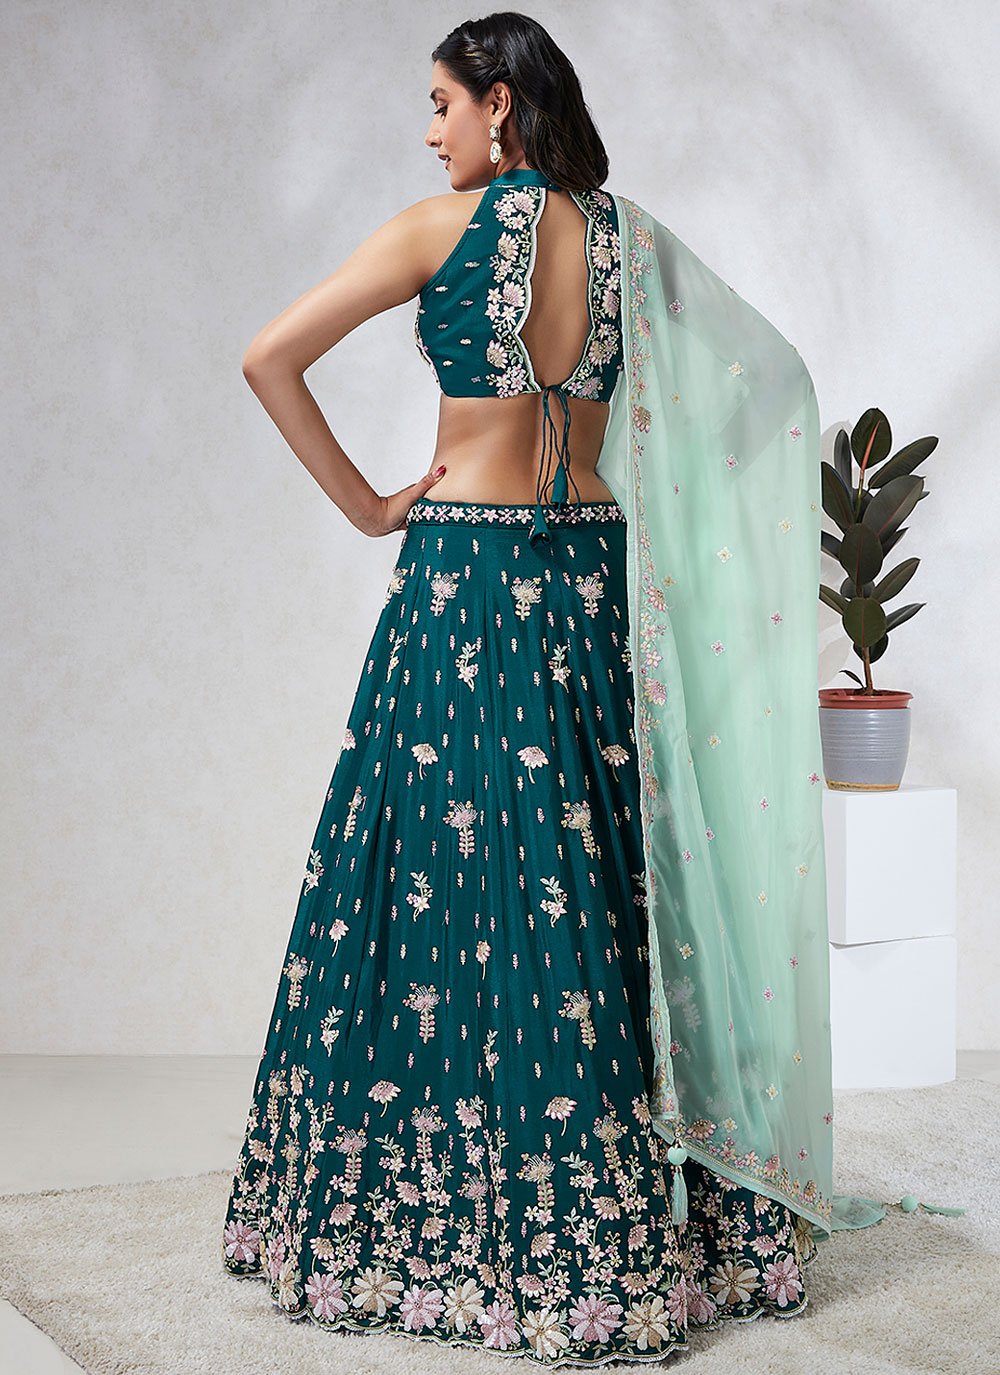 Opulent Green Poly Georgette Lehenga Choli Set with Exquisite Printing and Swarovski Work